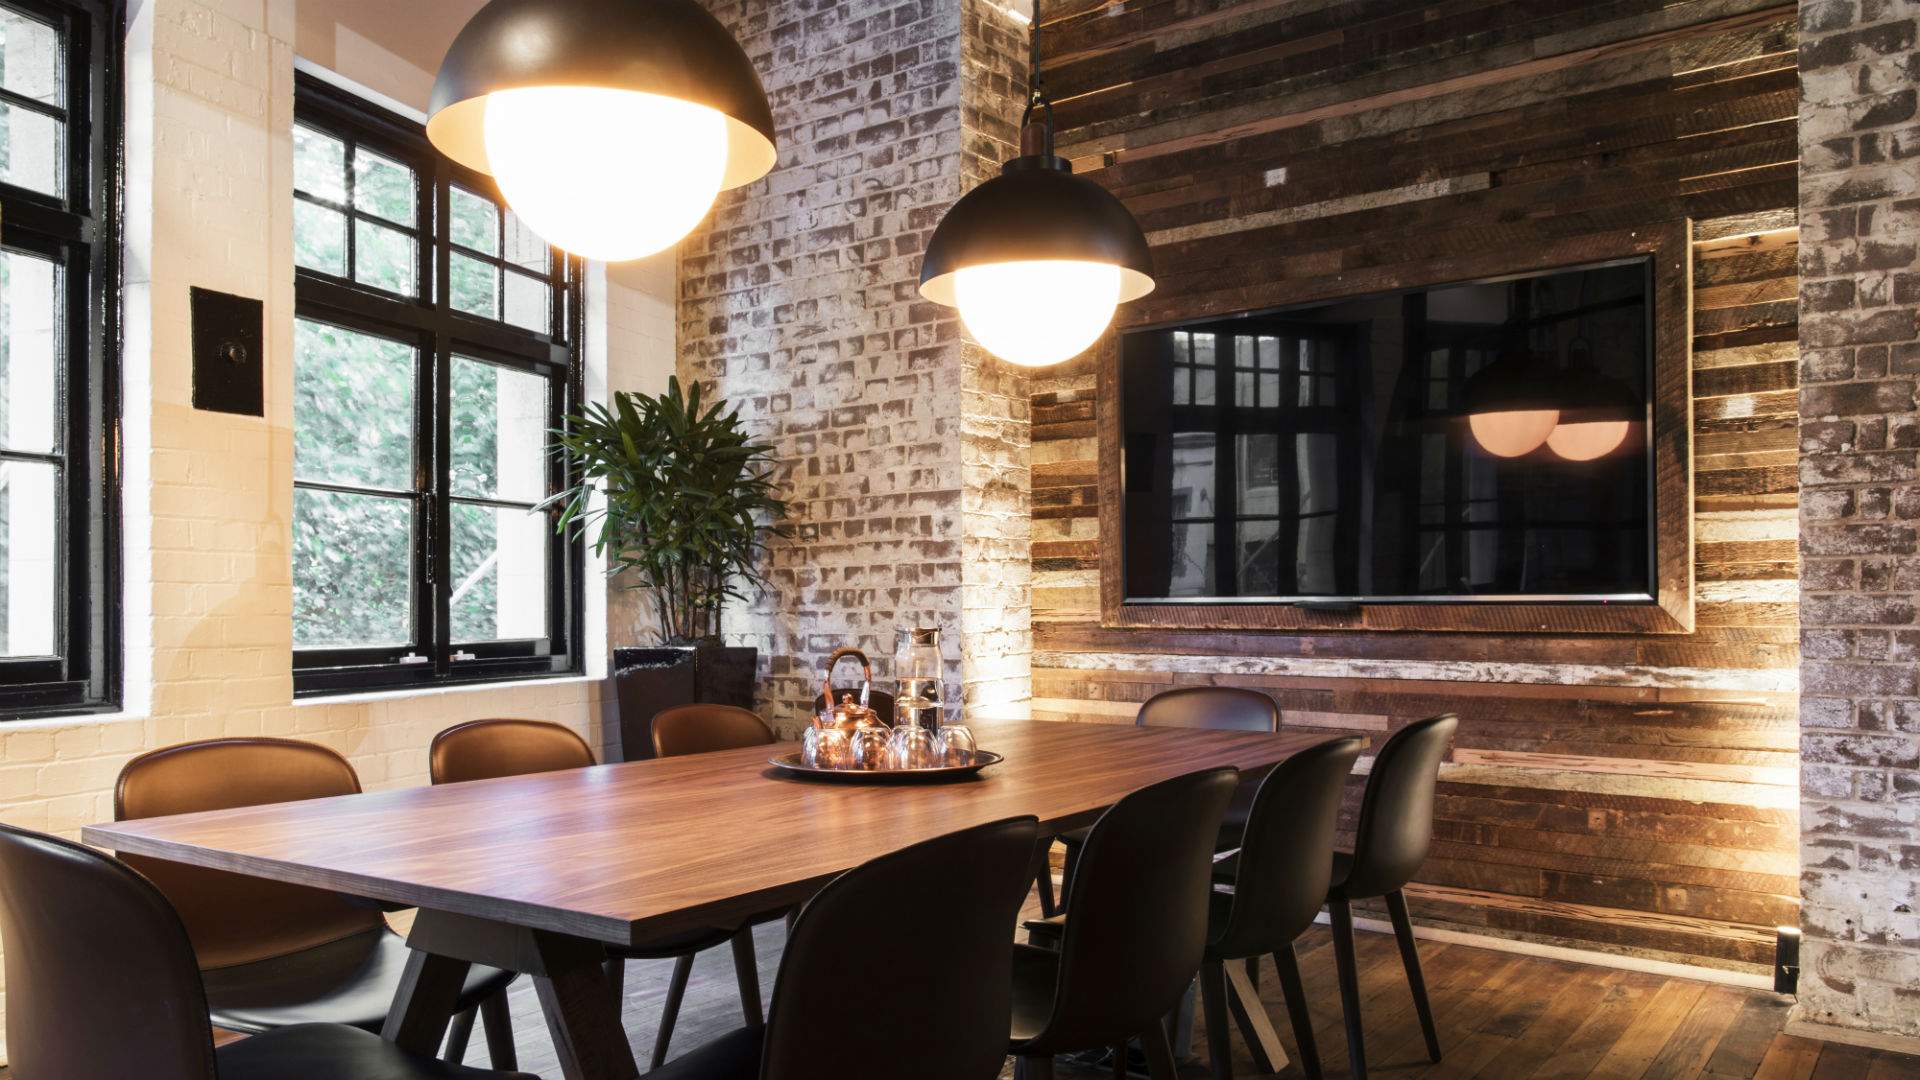 How This Heritage-Listed Coworking Space Is Fostering Creativity and